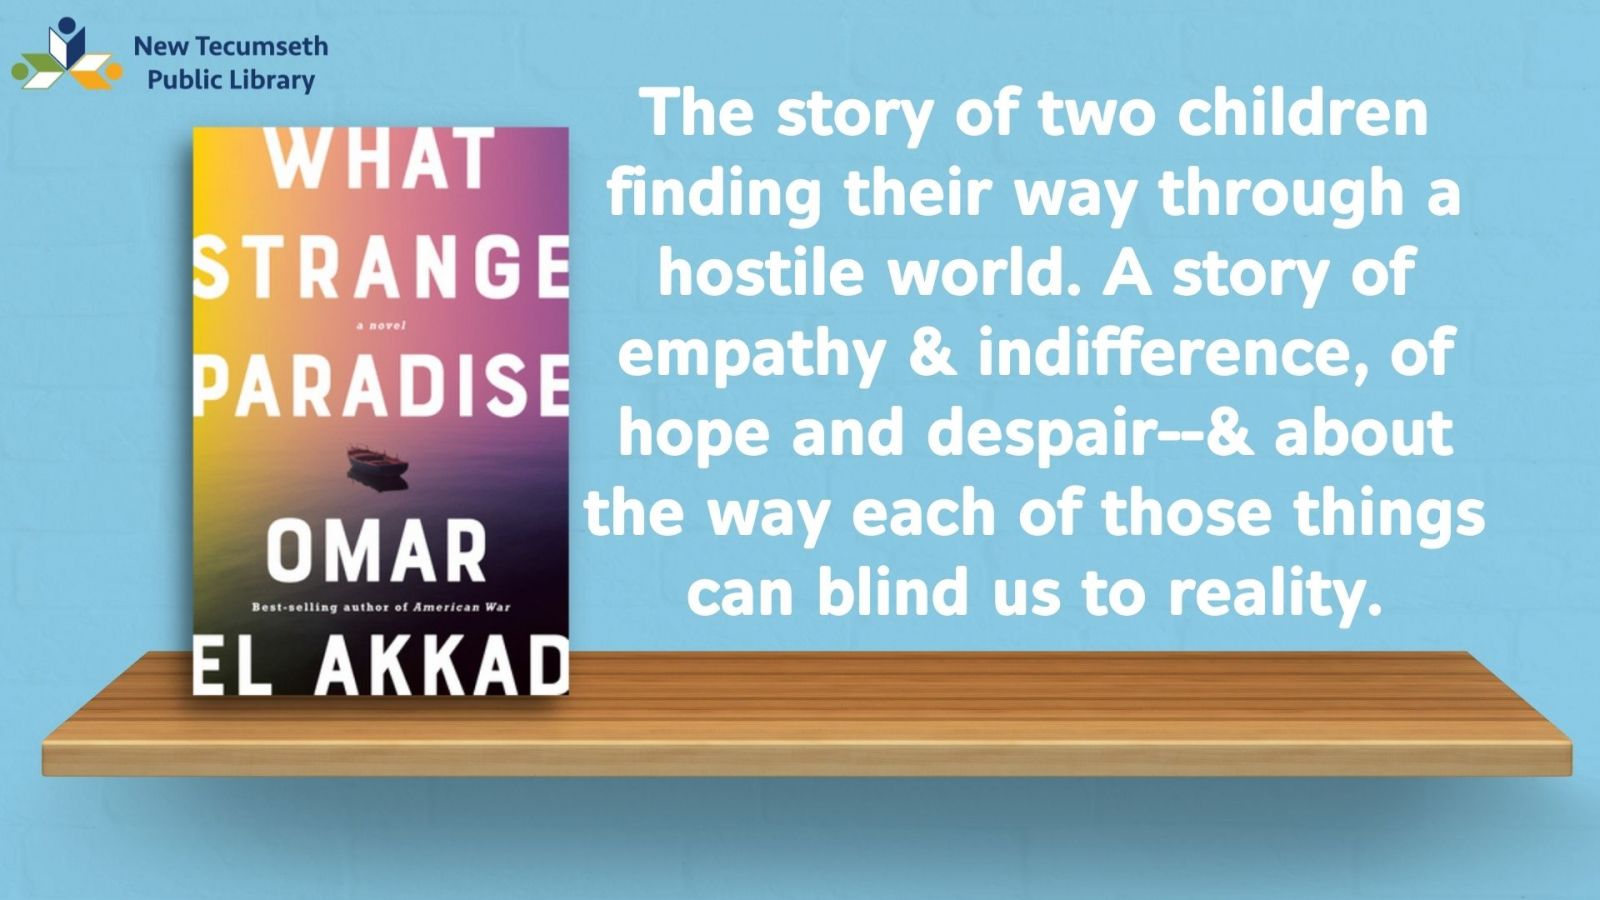 What Strange Paradise is the story of two children finding their way through a hostile world. But it is also a story of empathy and indifference, of hope and despair—and about the way each of those things can blind us to reality. 